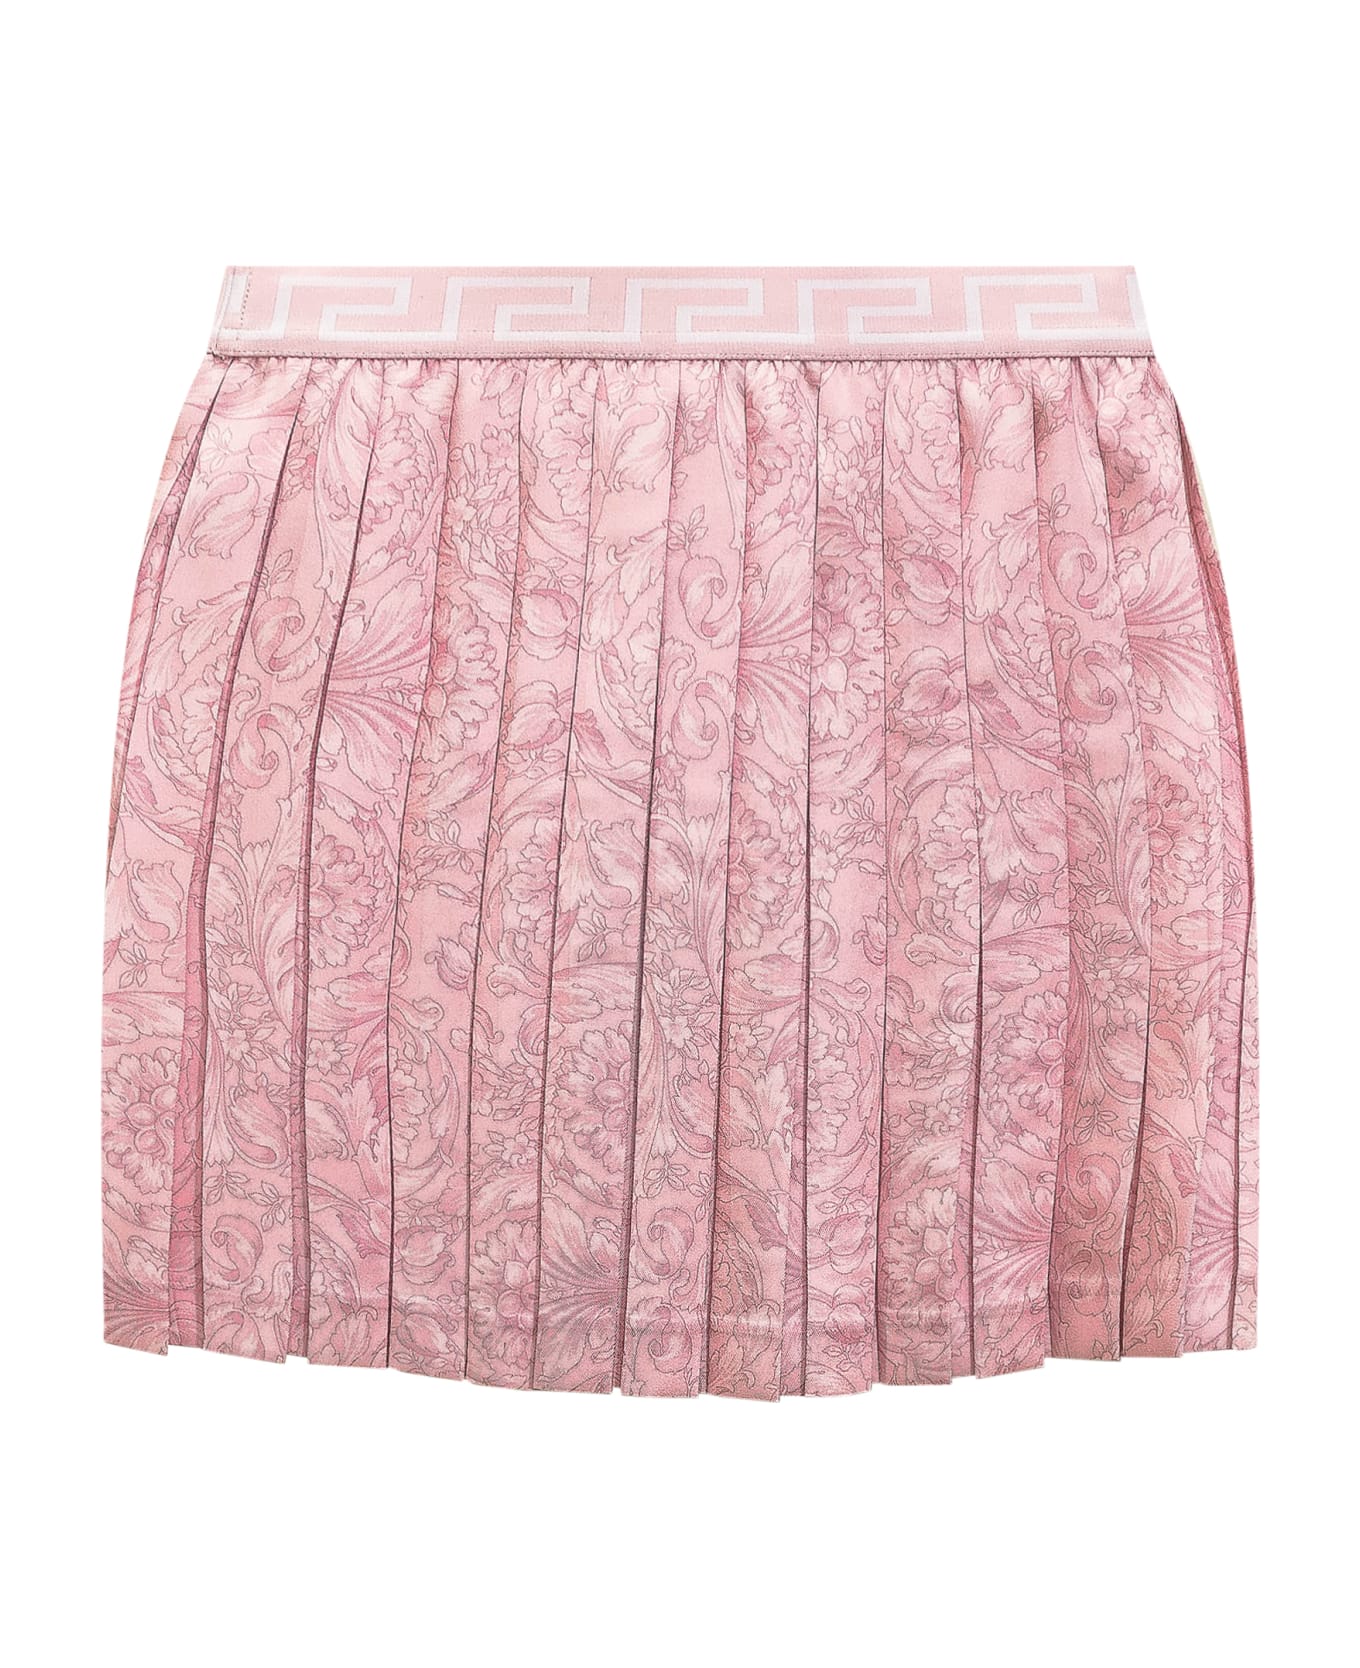 Young Versace Barocco Skirt - PALE PINK ボトムス